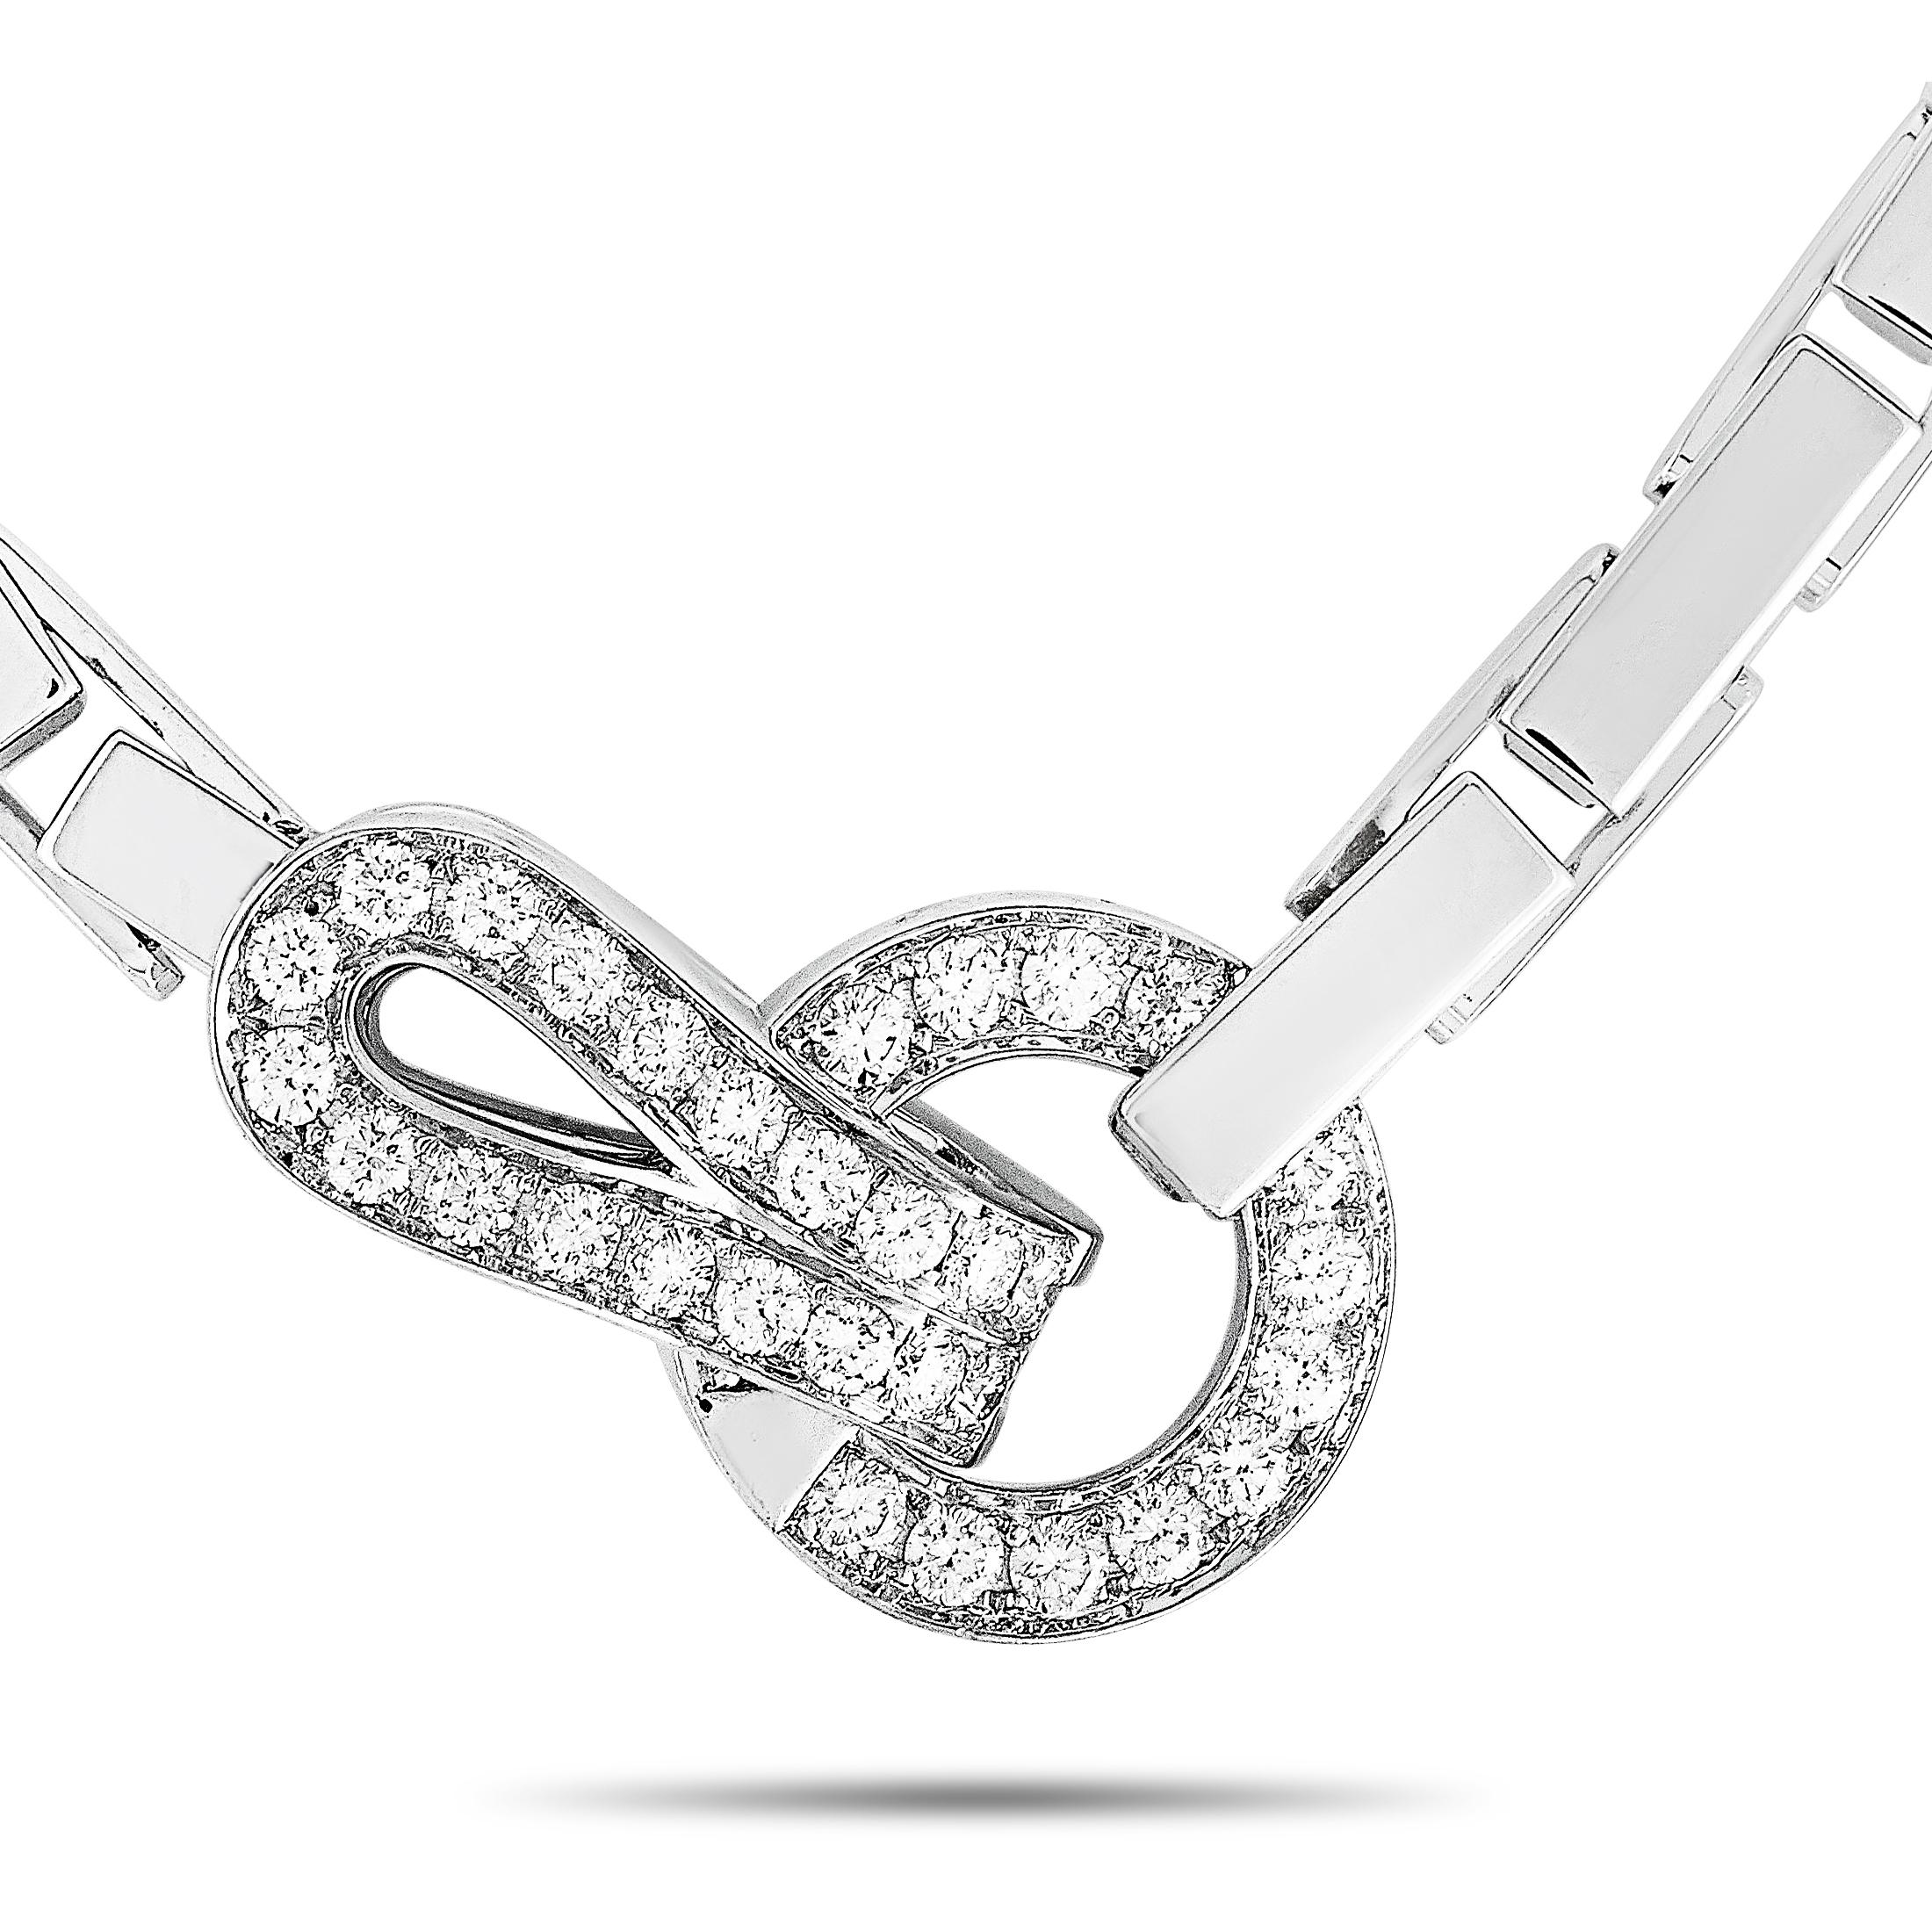 The Cartier “Agrafe” necklace is crafted from 18K white gold and weighs 62.2 grams. It is presented with a 15” chain and a pendant that measures 0.90” in length and 0.60” in width. The necklace is embellished with diamonds that boast grade E color